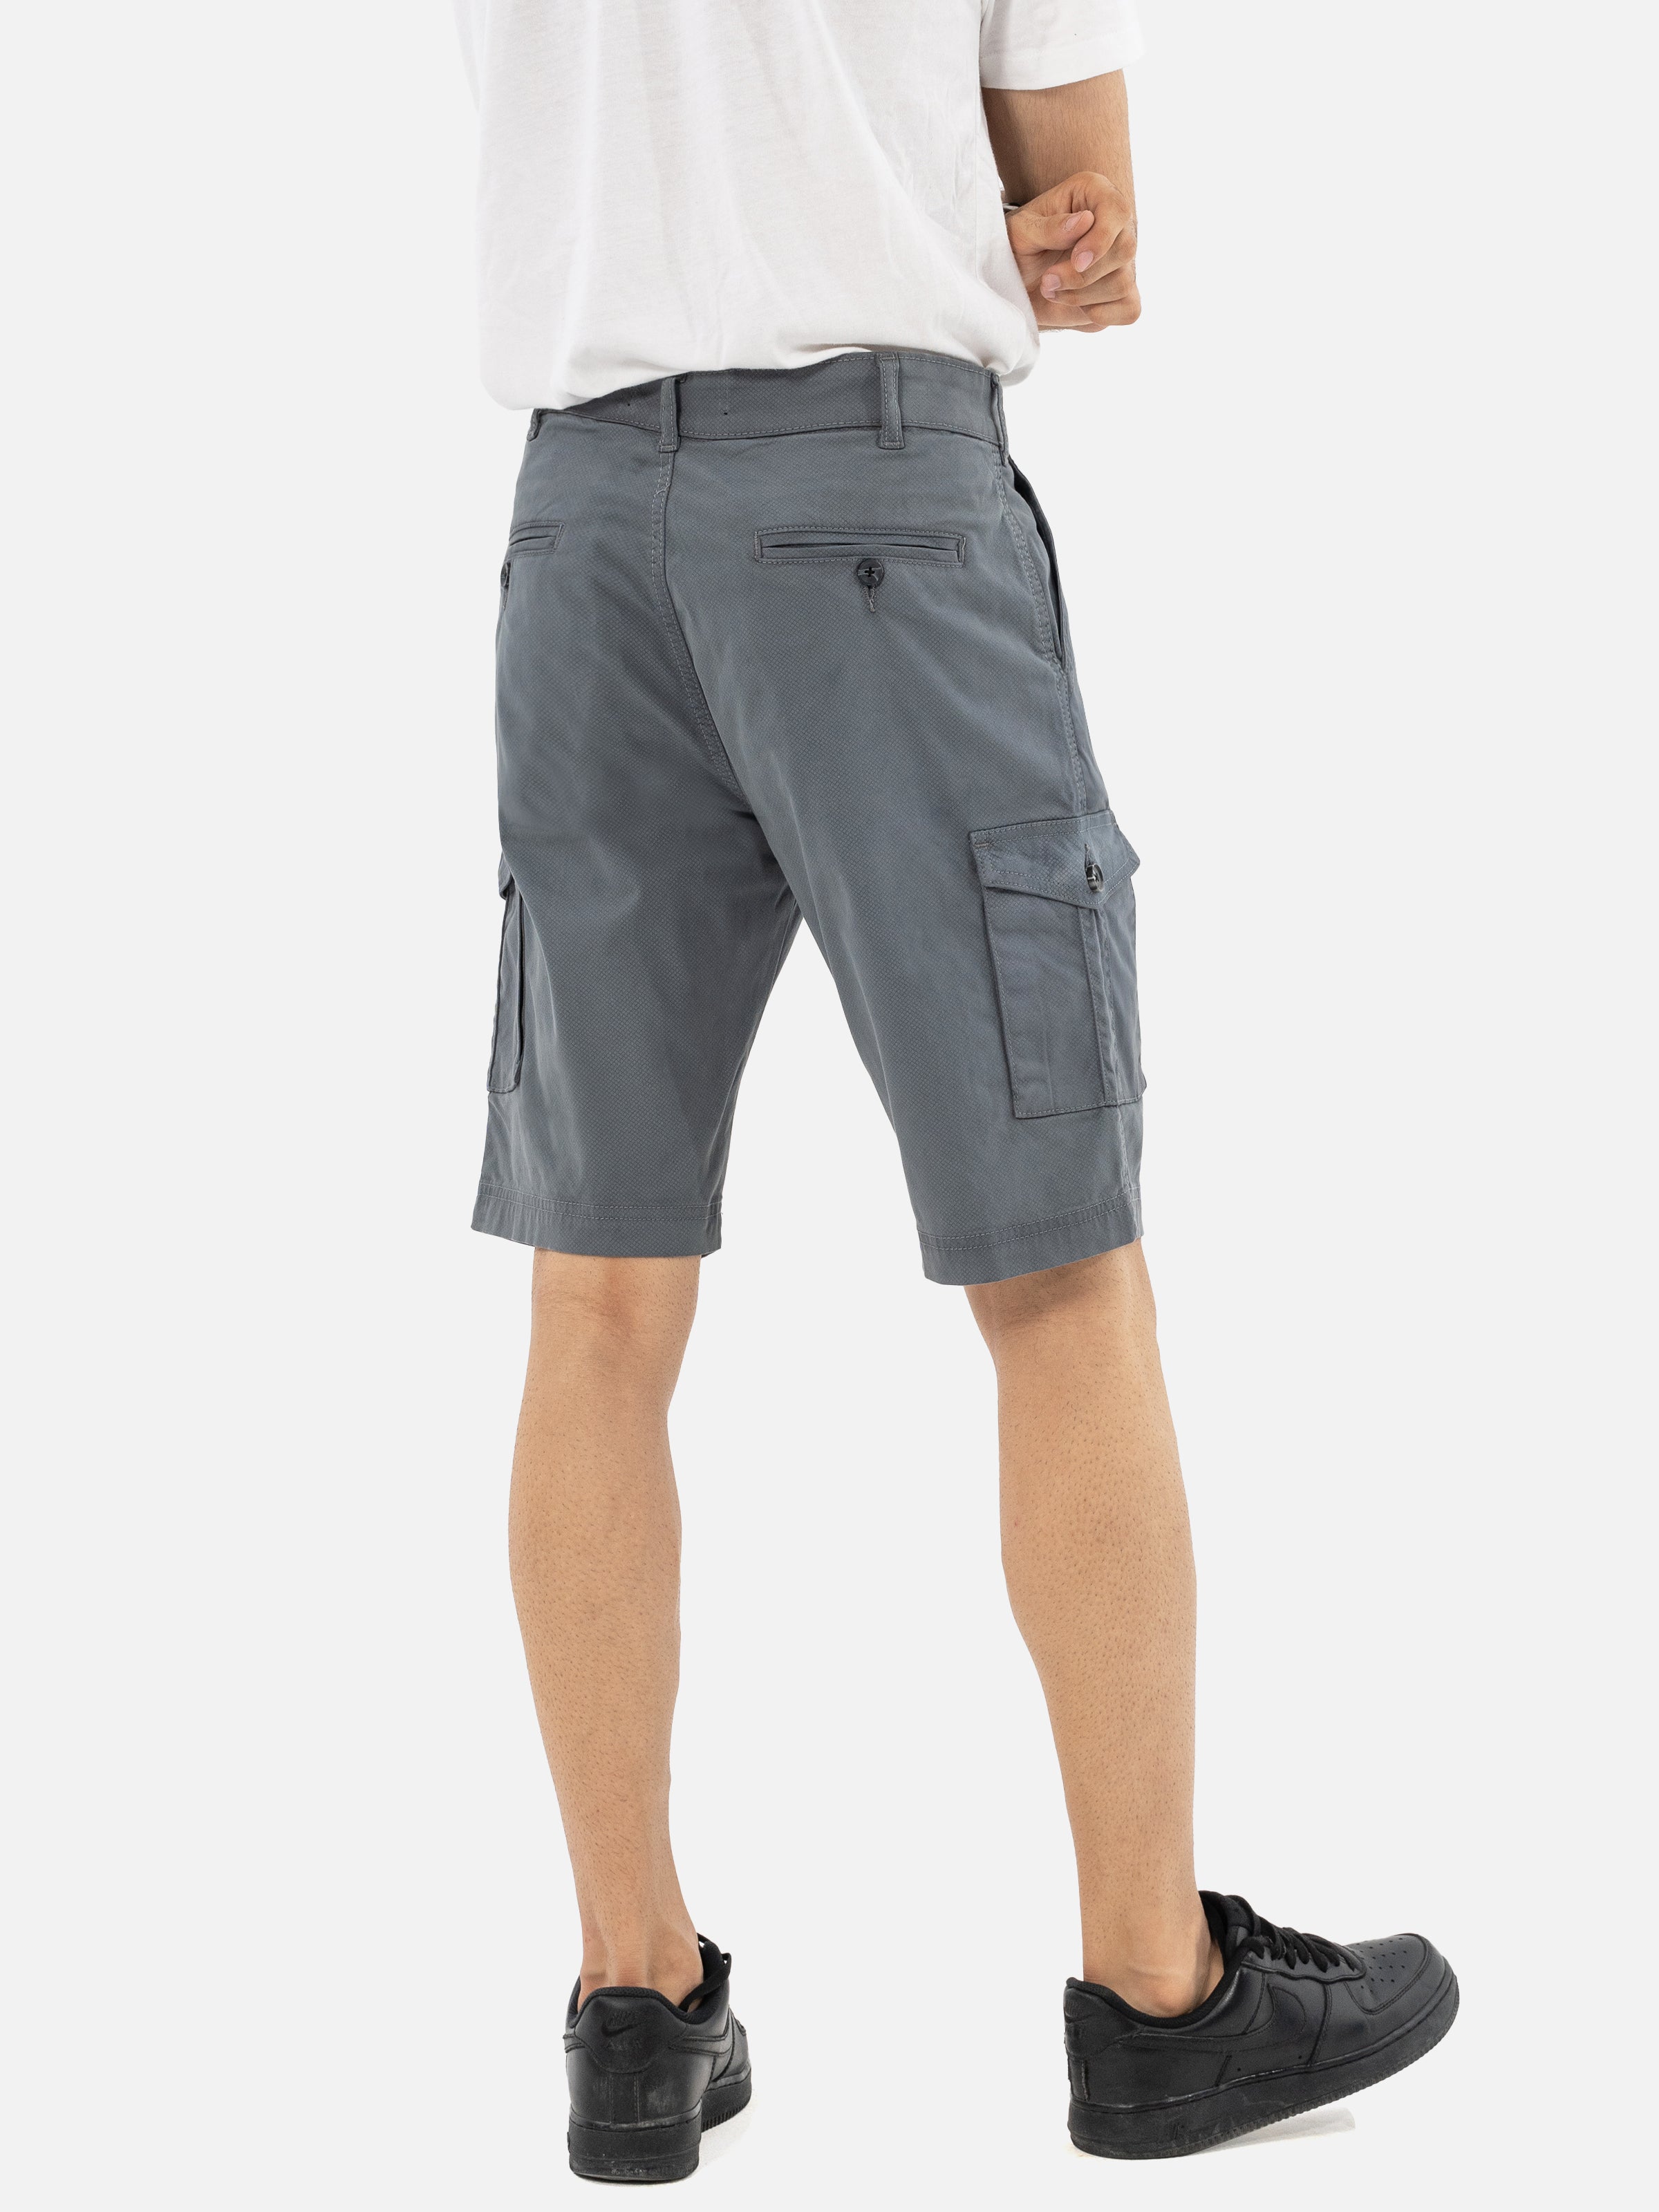 CASUAL SHORTS SMART FIT GREY